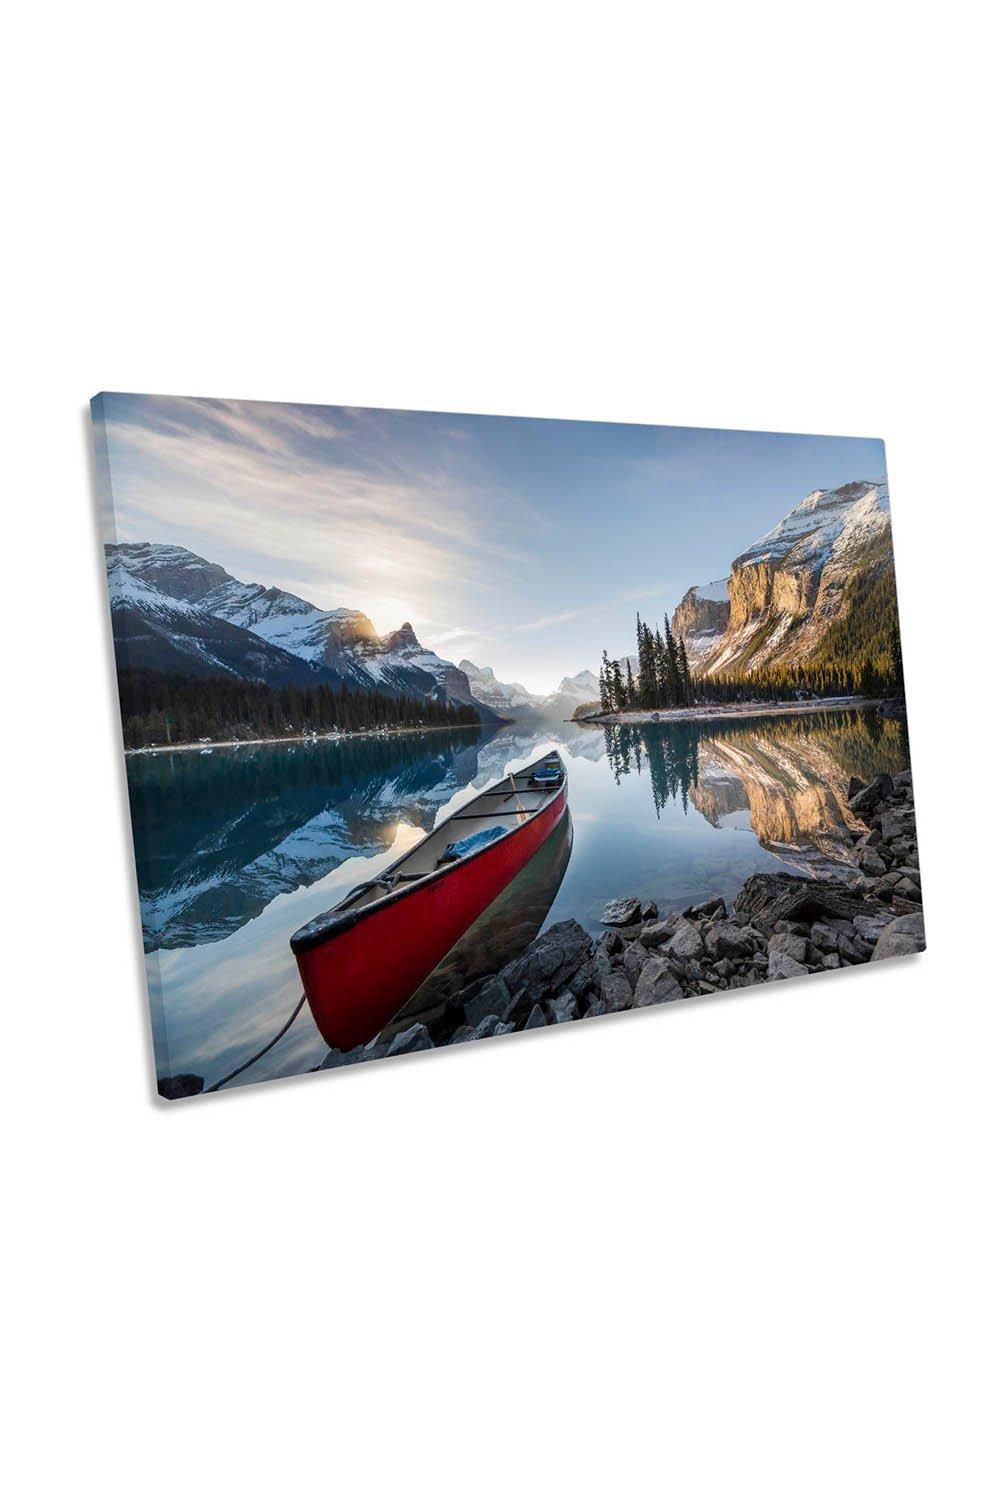 True Canadian Lake Meligne Boat Mountains Canvas Wall Art Picture Print